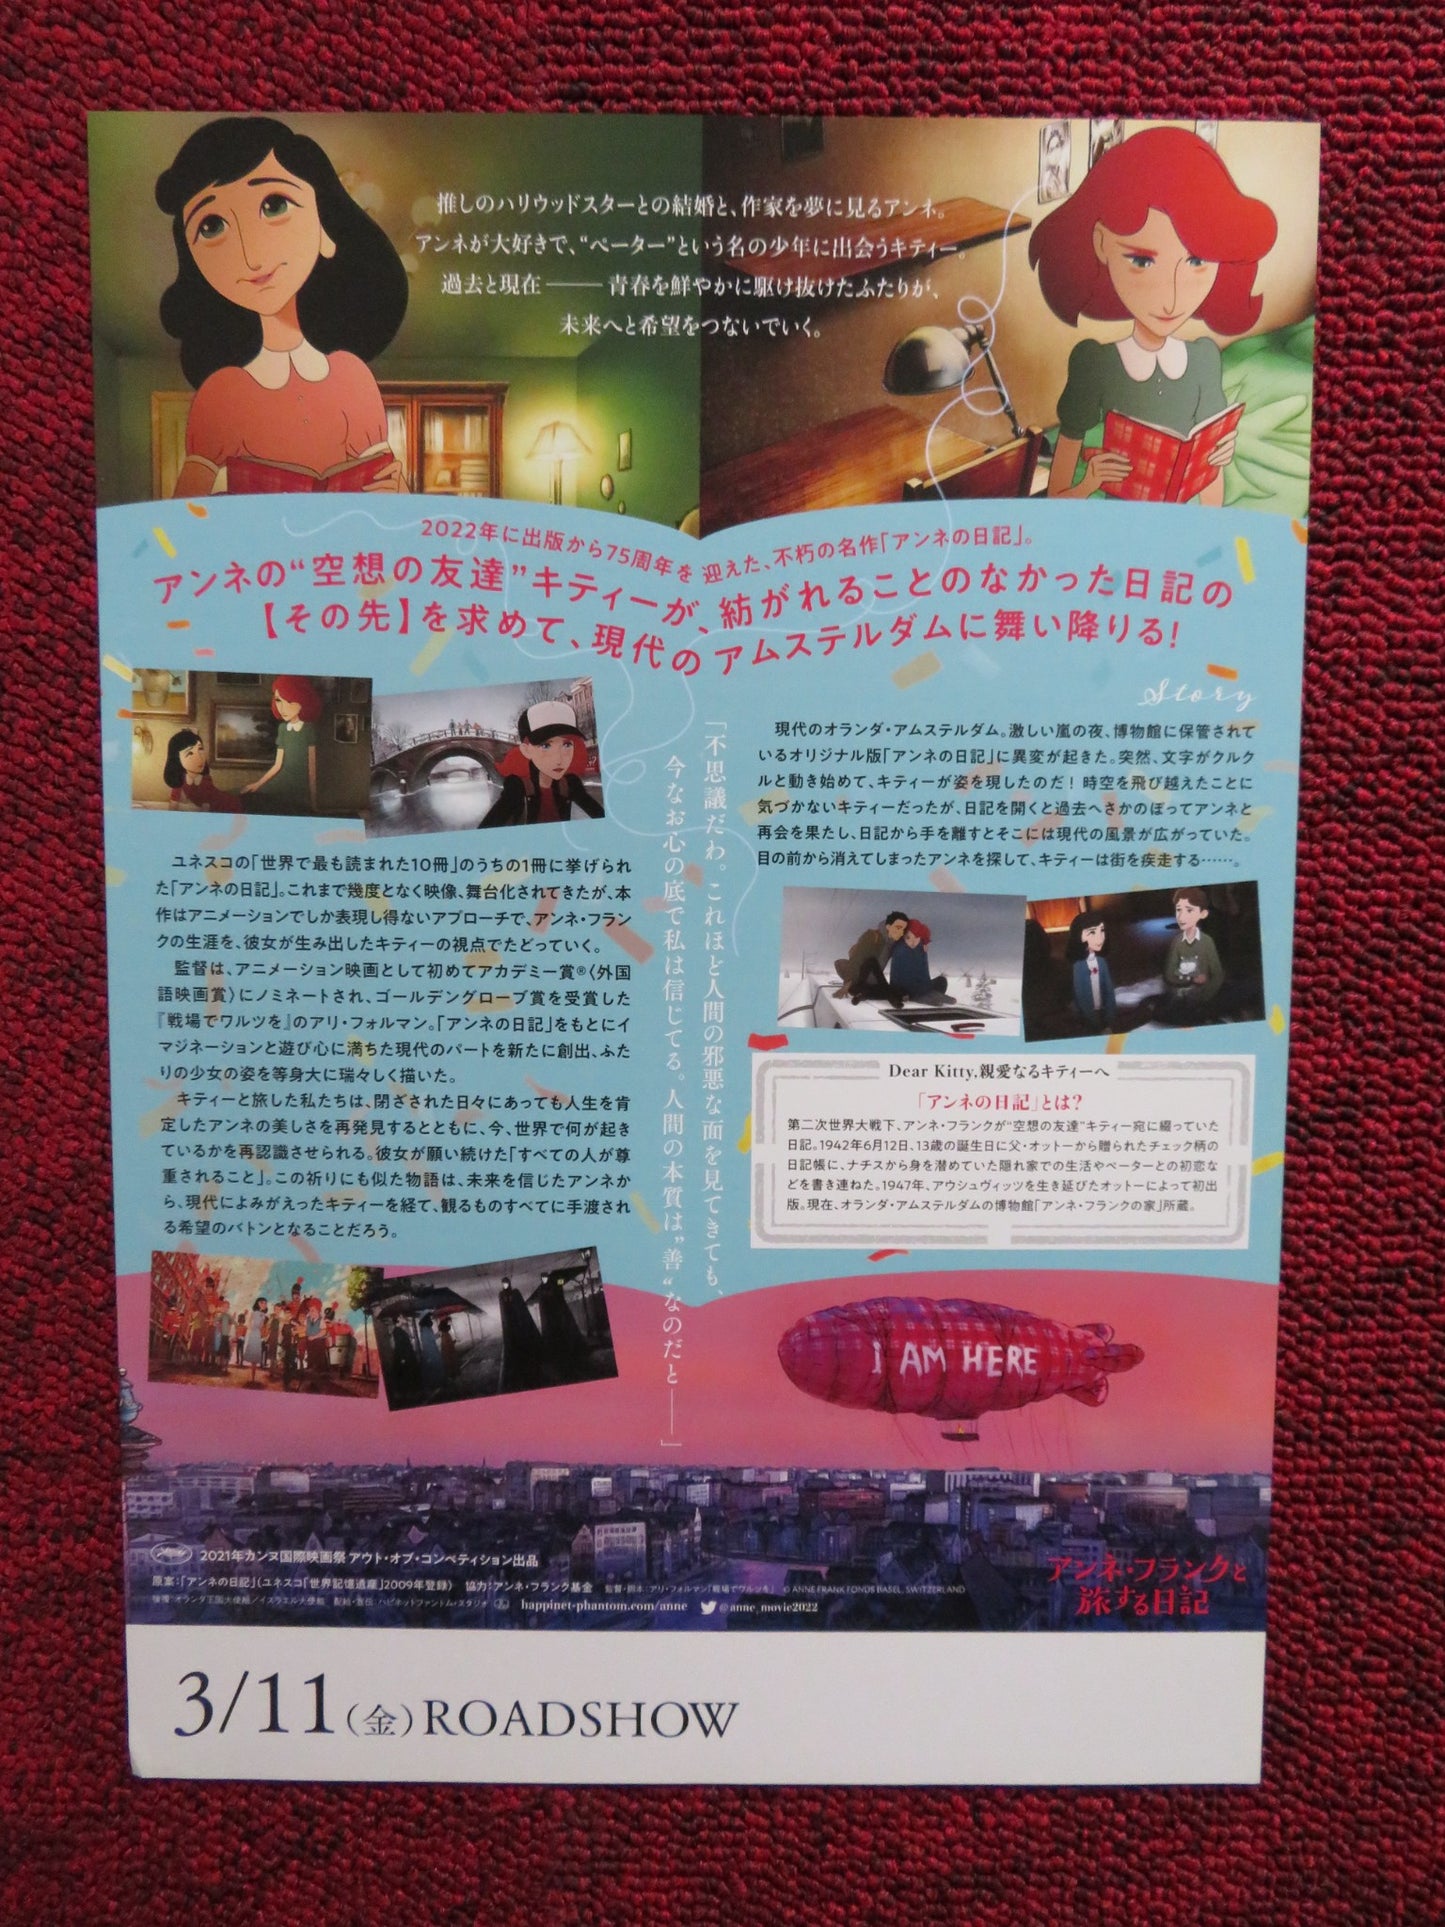 WHERE IS ANNE FRANK JAPANESE CHIRASHI (B5) POSTER EMILY CAREY RUBY STOKES 2021